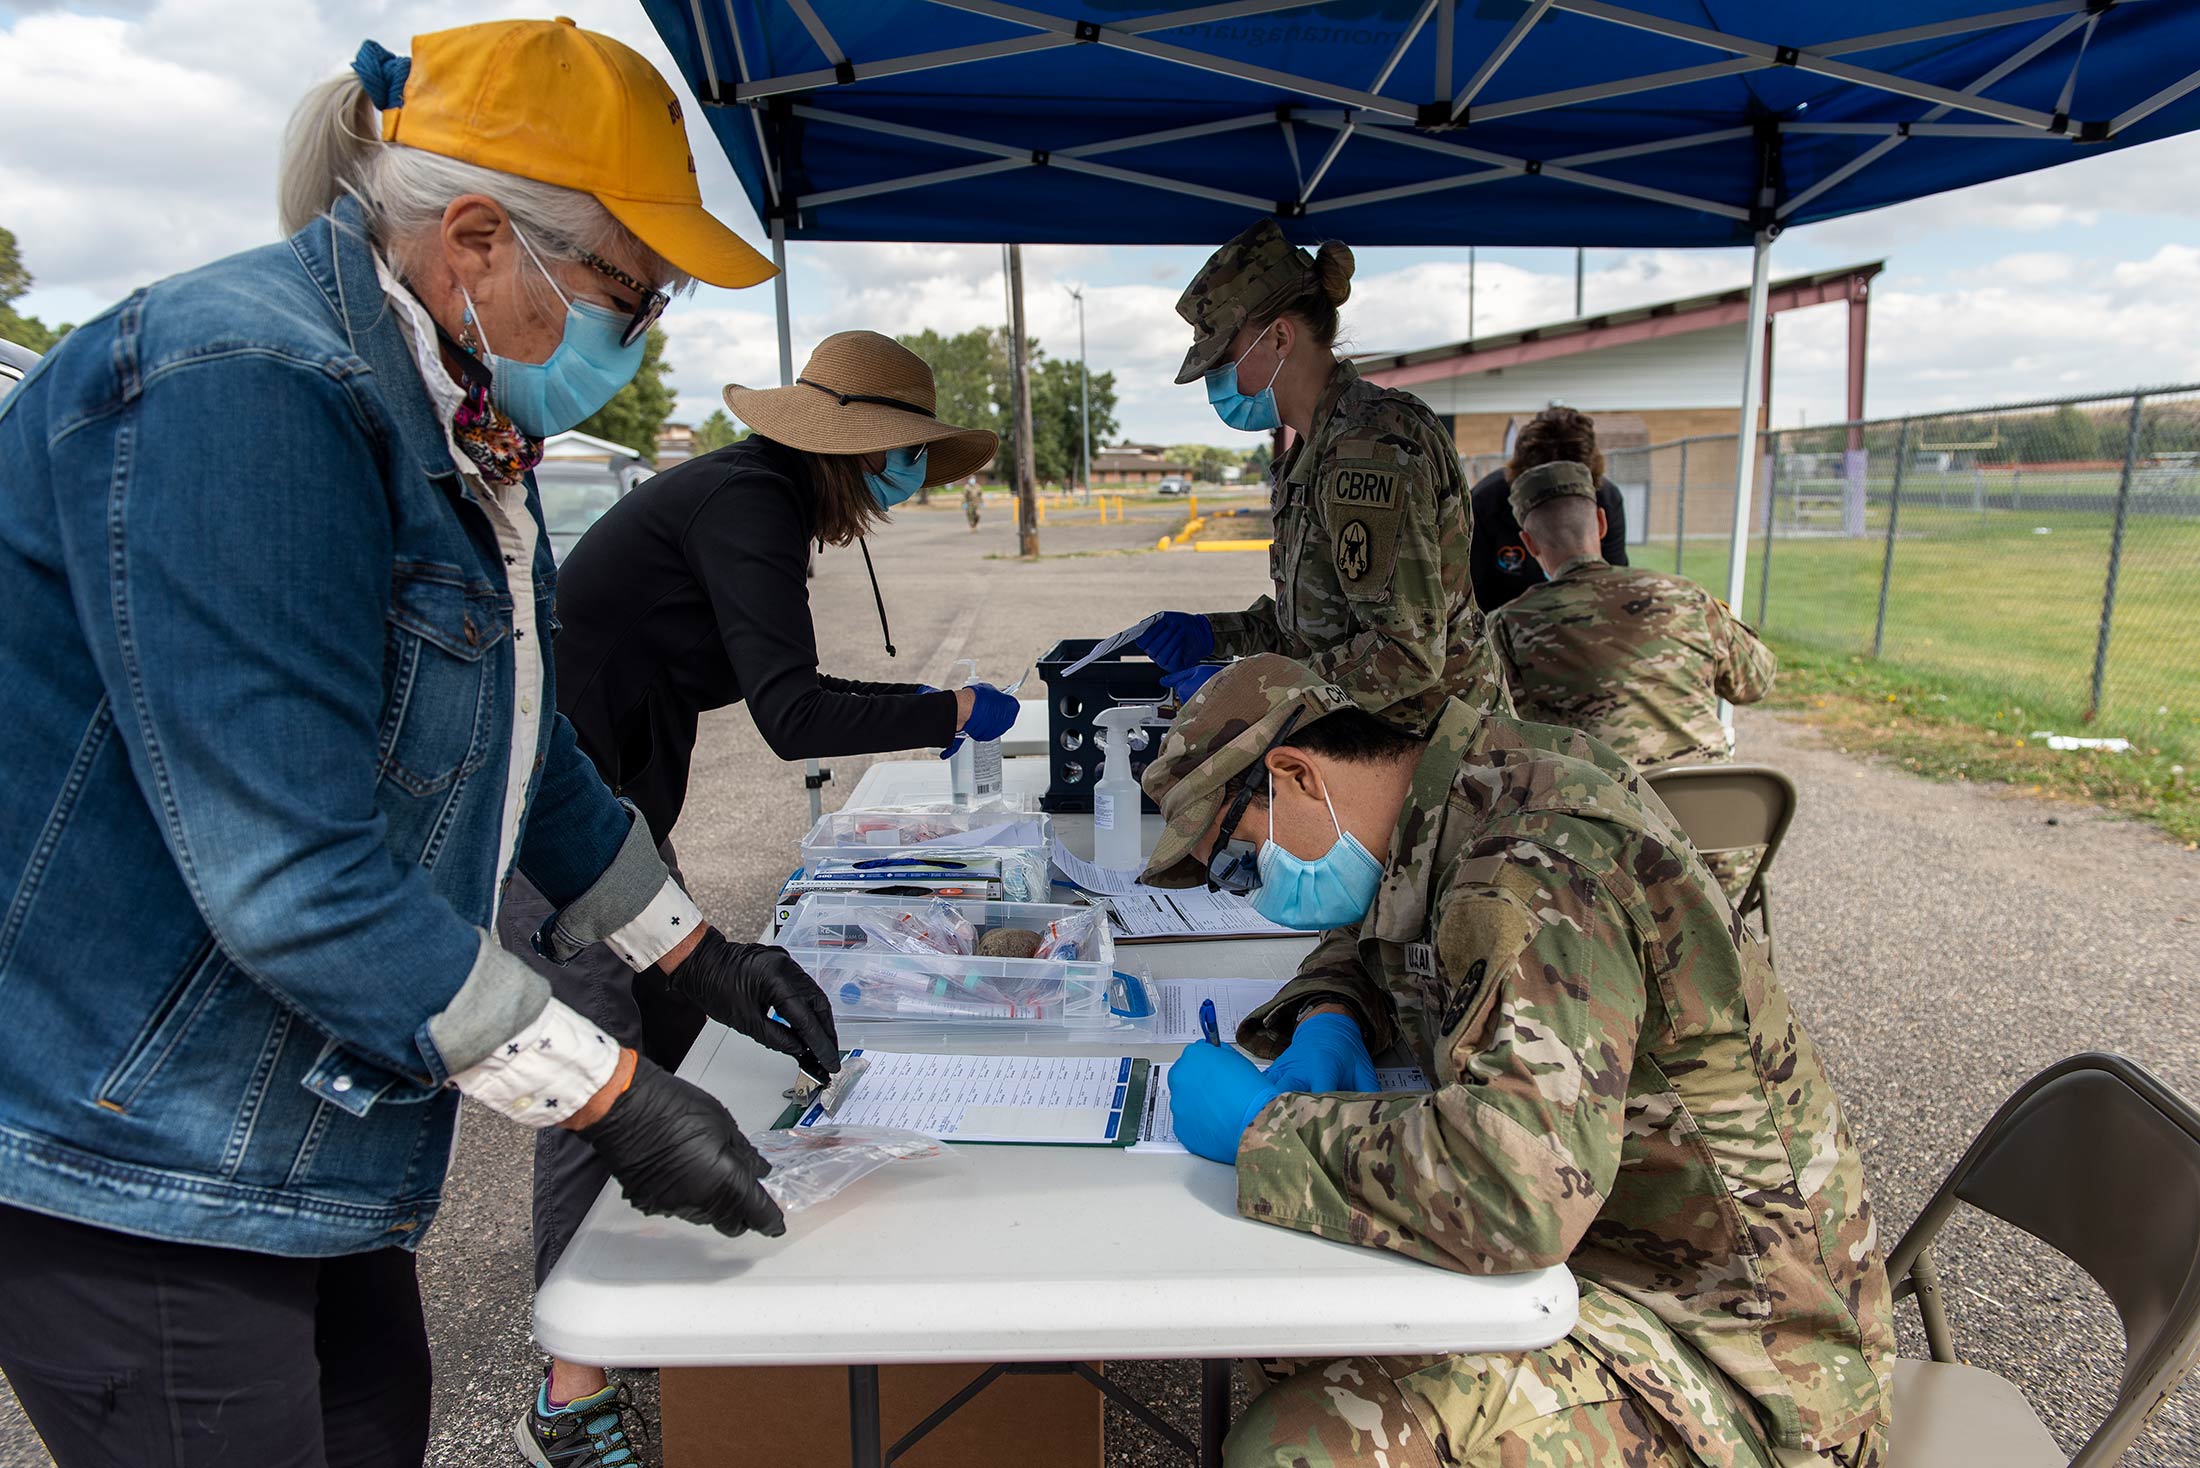 The Park County Health Department and members of the Montana National Guard conduct Covid-19 testing in Livingston, Montana, on Sept. 20.